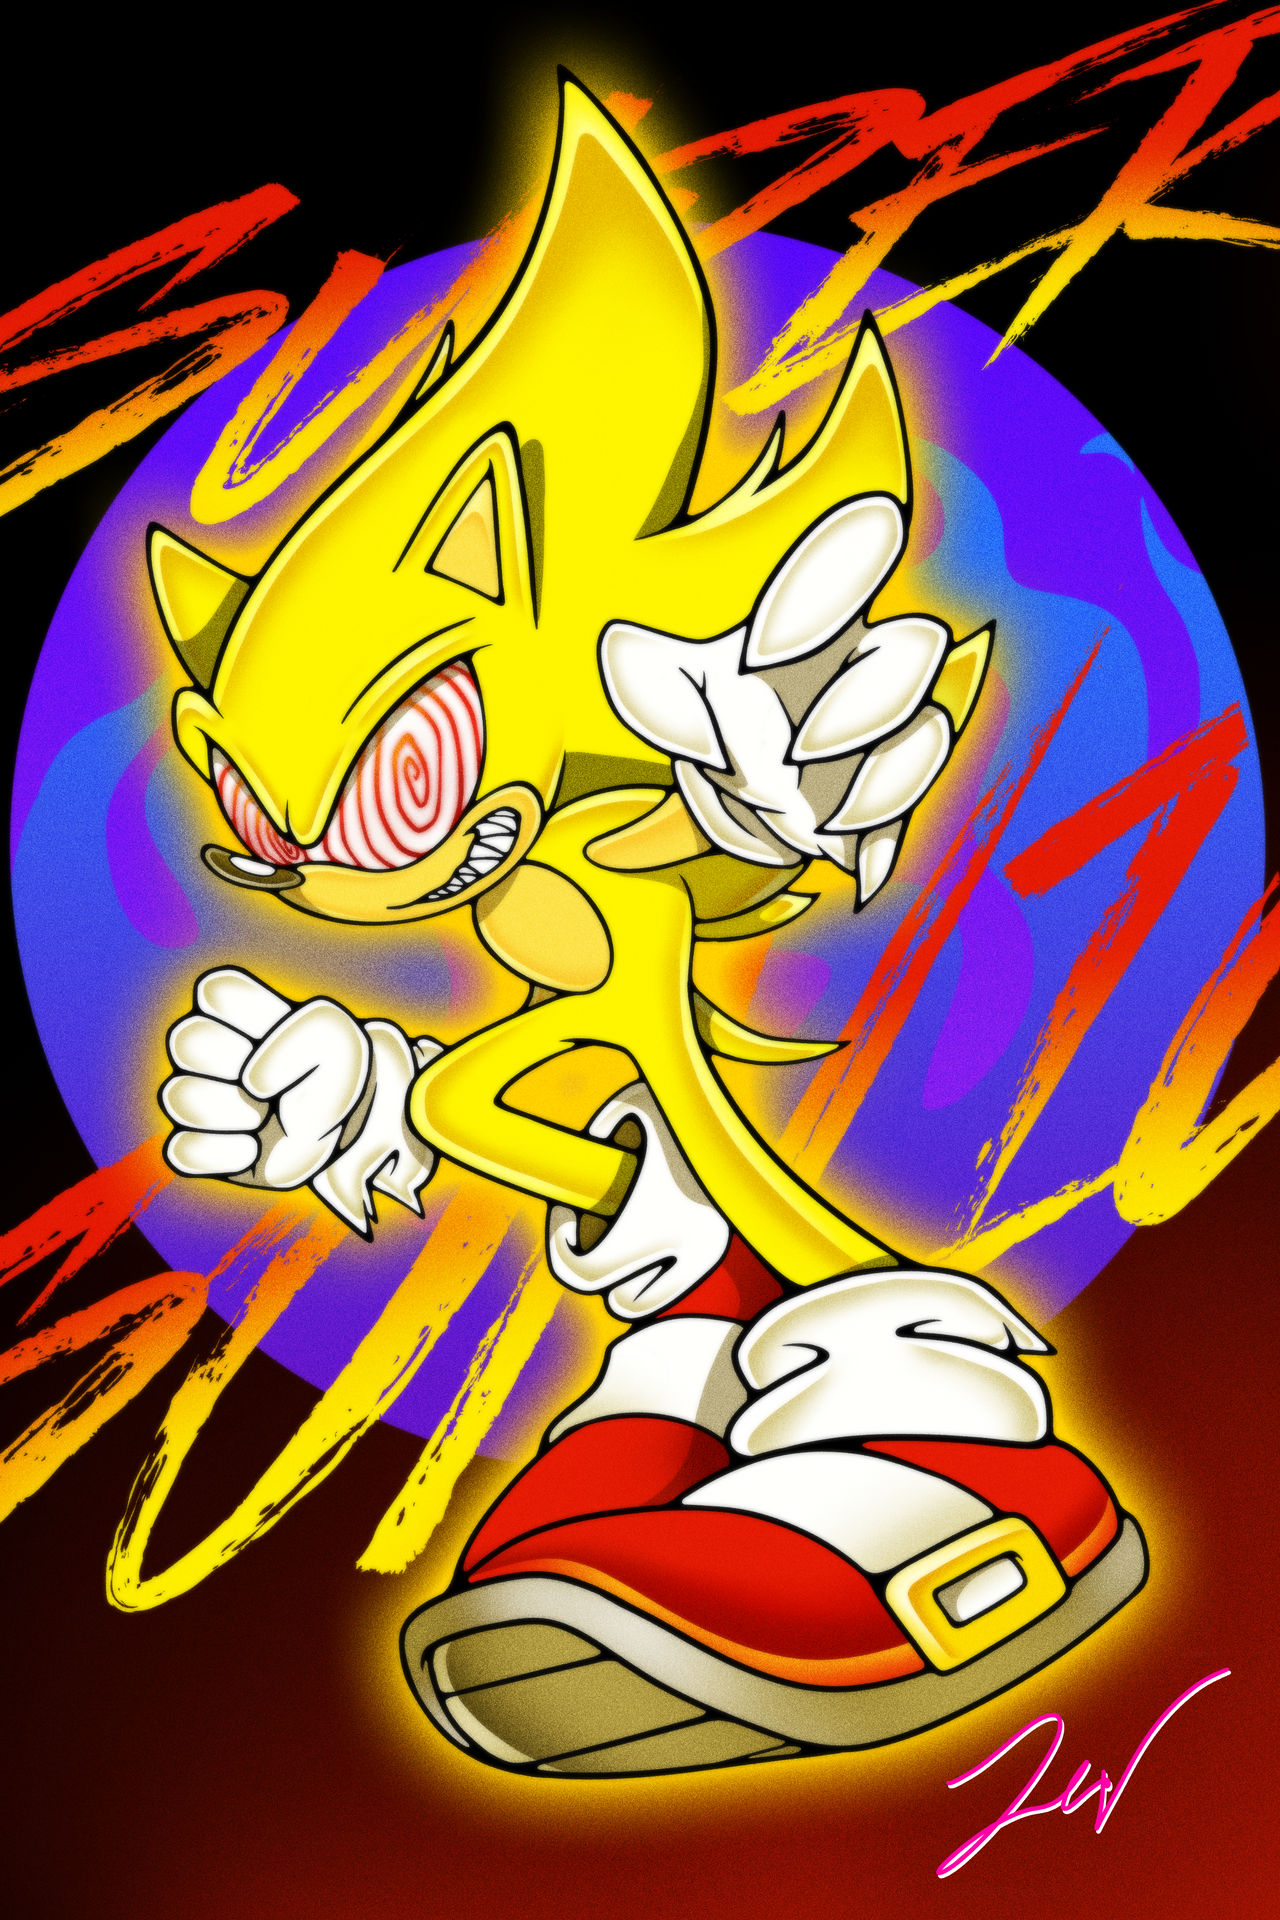 And that's a Fleetway Super Sonic in Sonic 2 